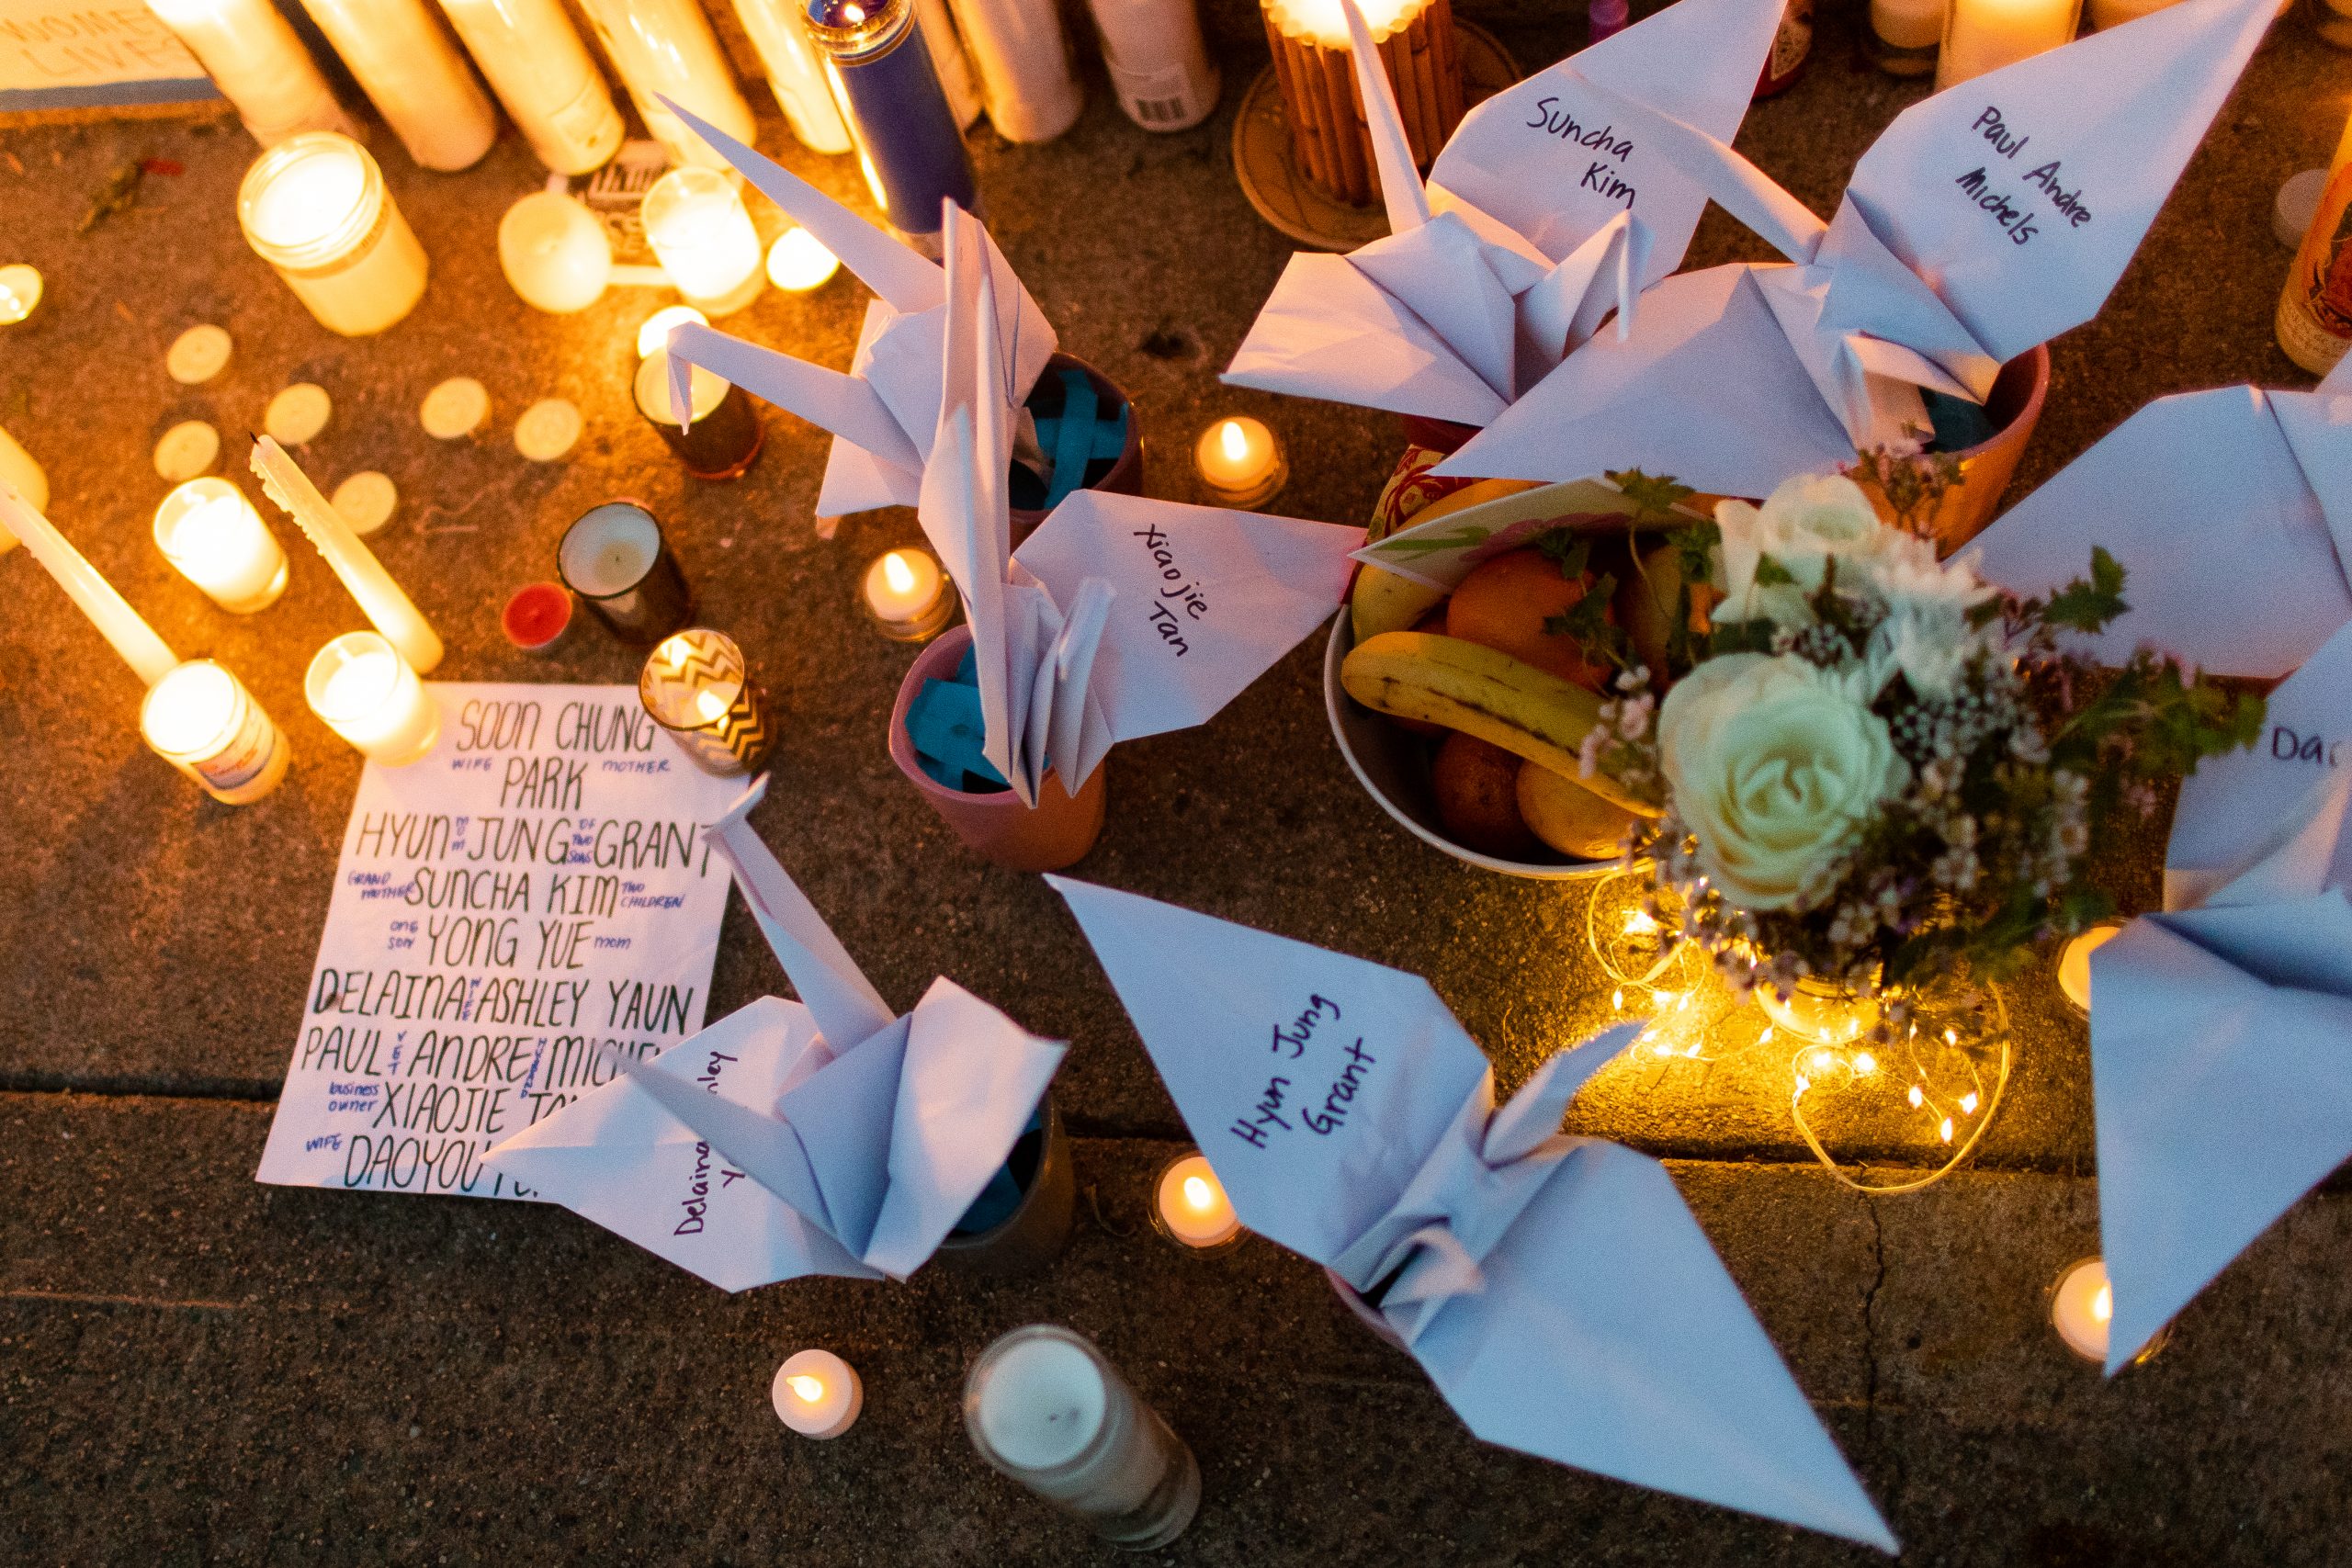 image of white paper cranes with names of Atlanta shooting victims and candles surround the cranes